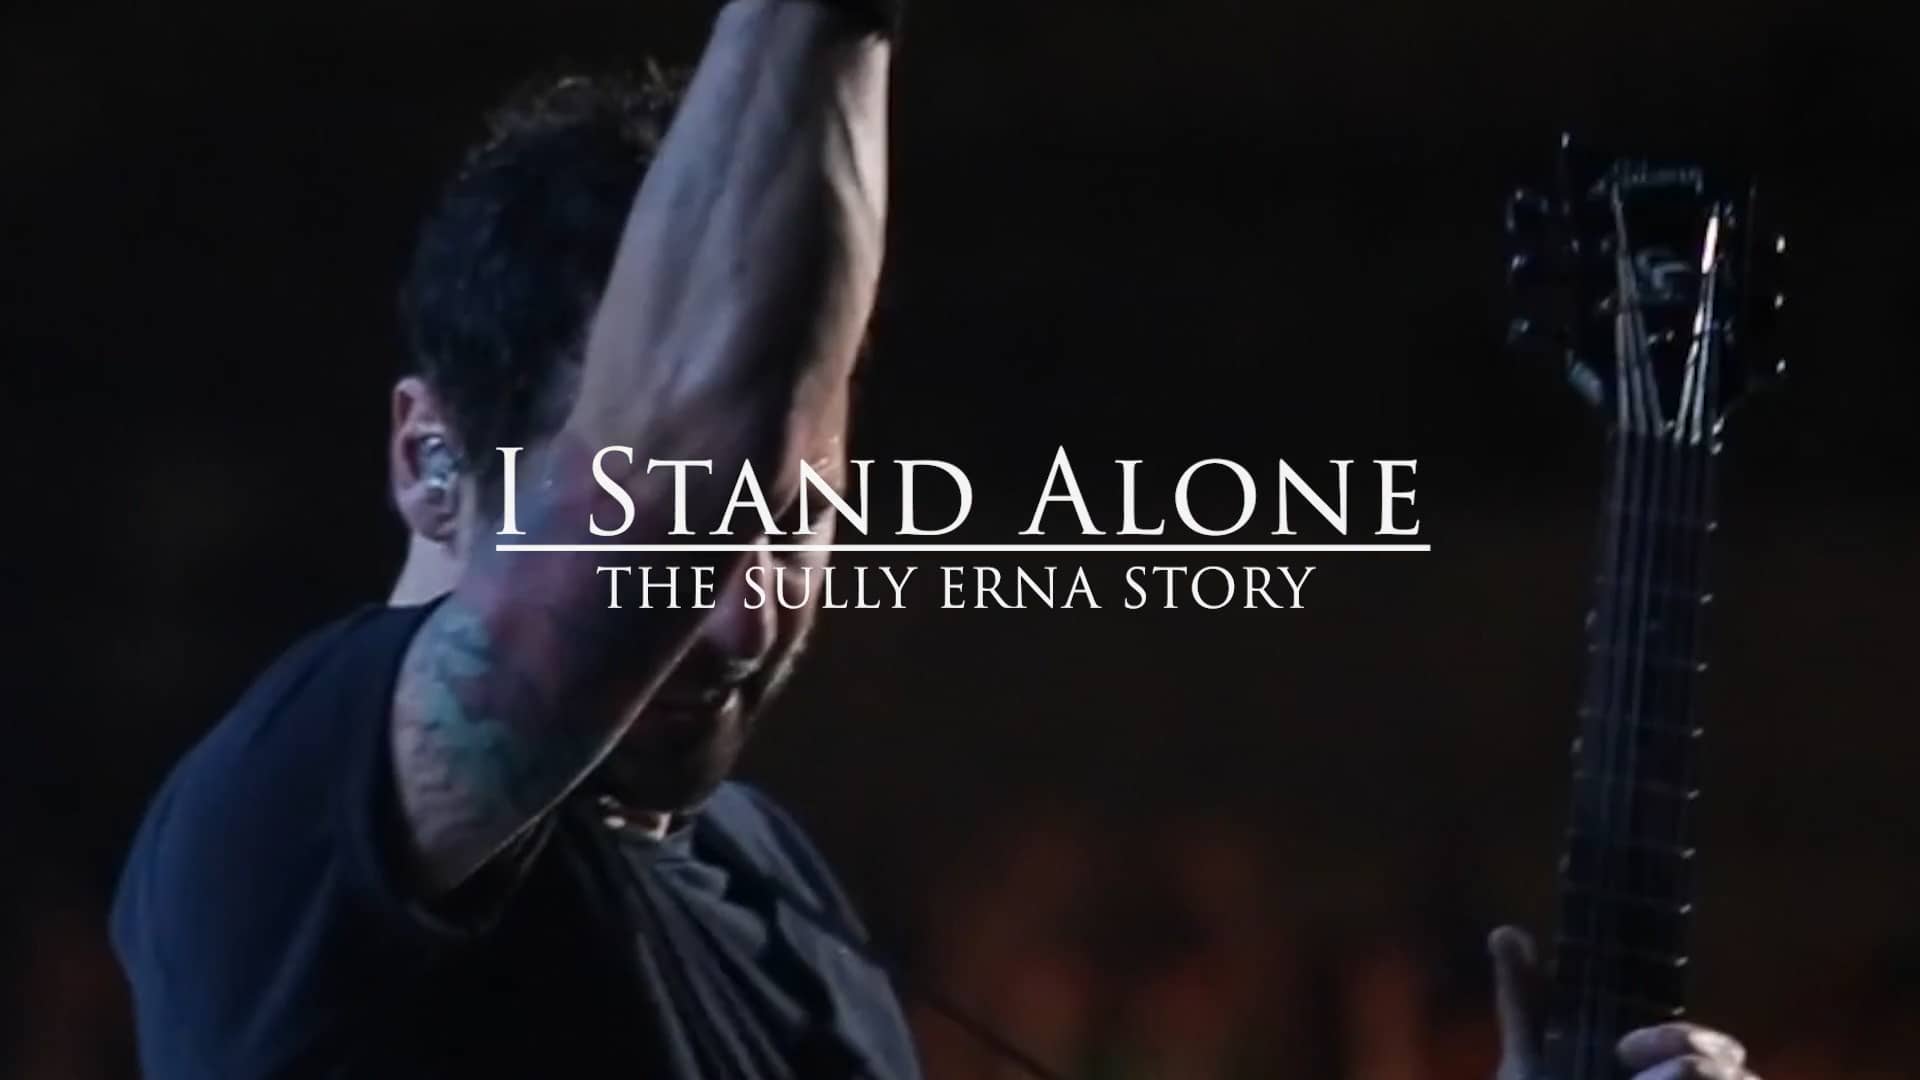 I Stand Alone The Sully Erna Story trailer 11/23 on Vimeo